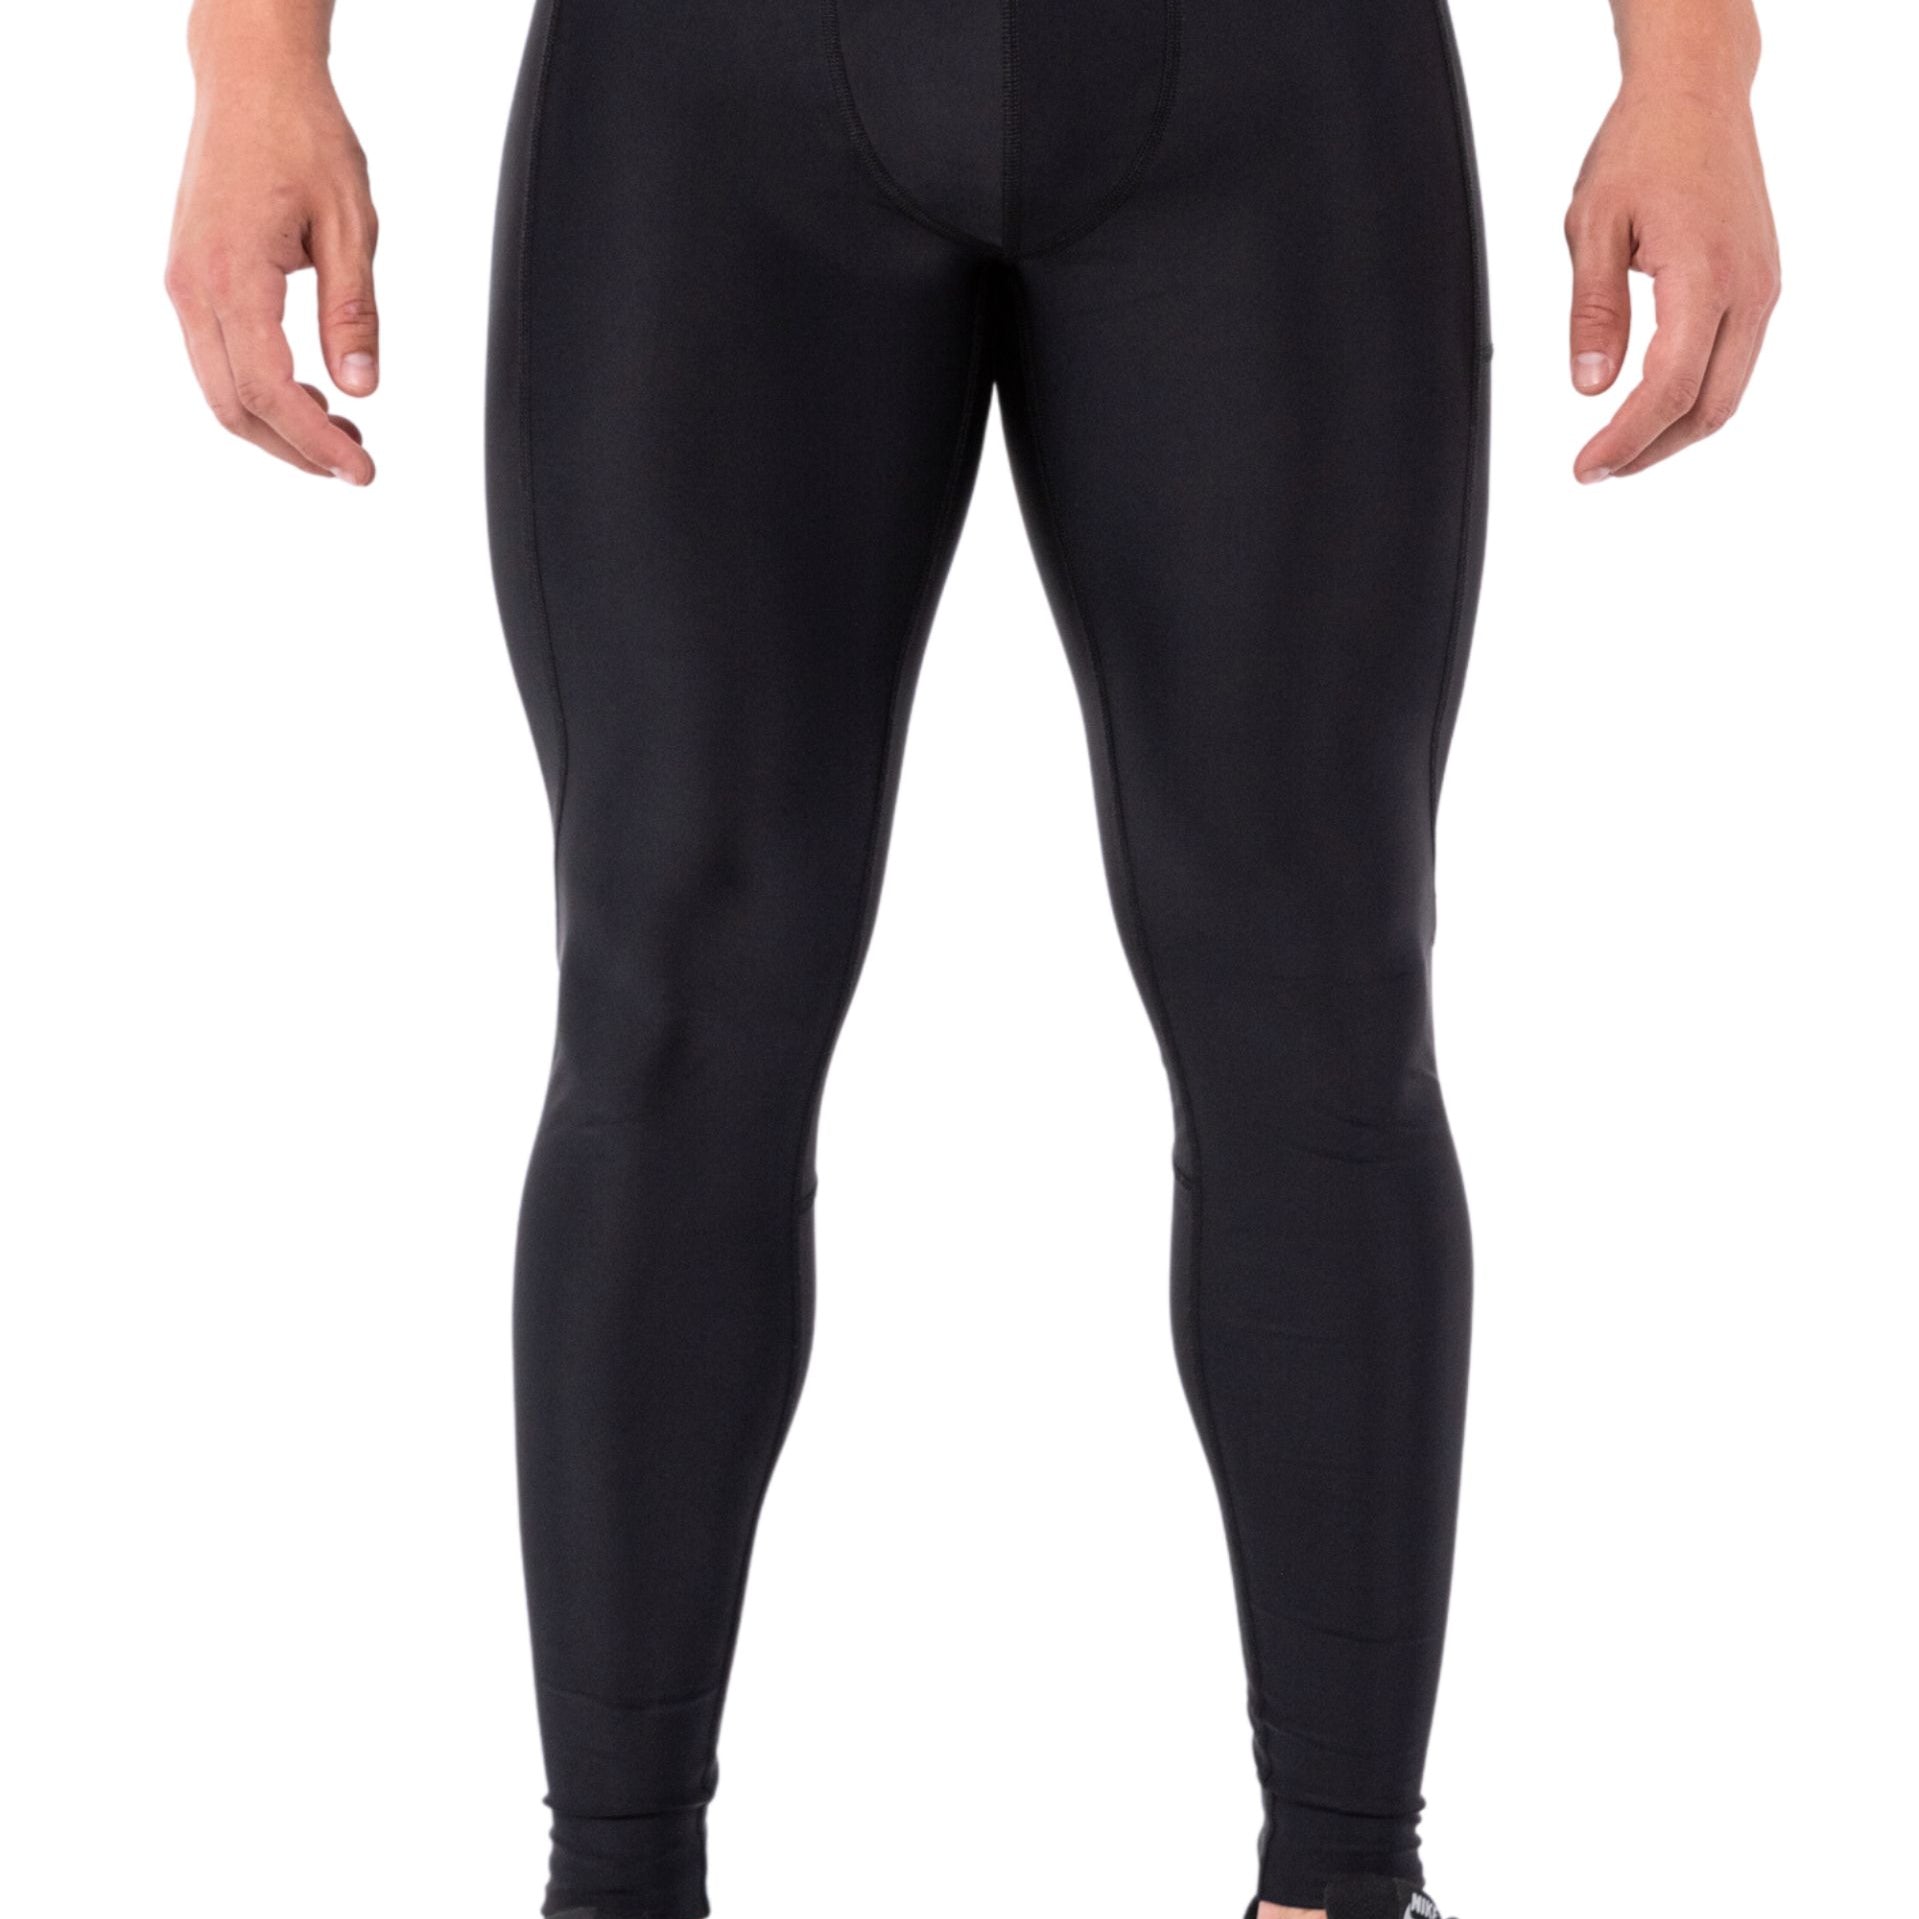 Midnight Black Meggings with Removable Crotch Pad - Kapow Meggings